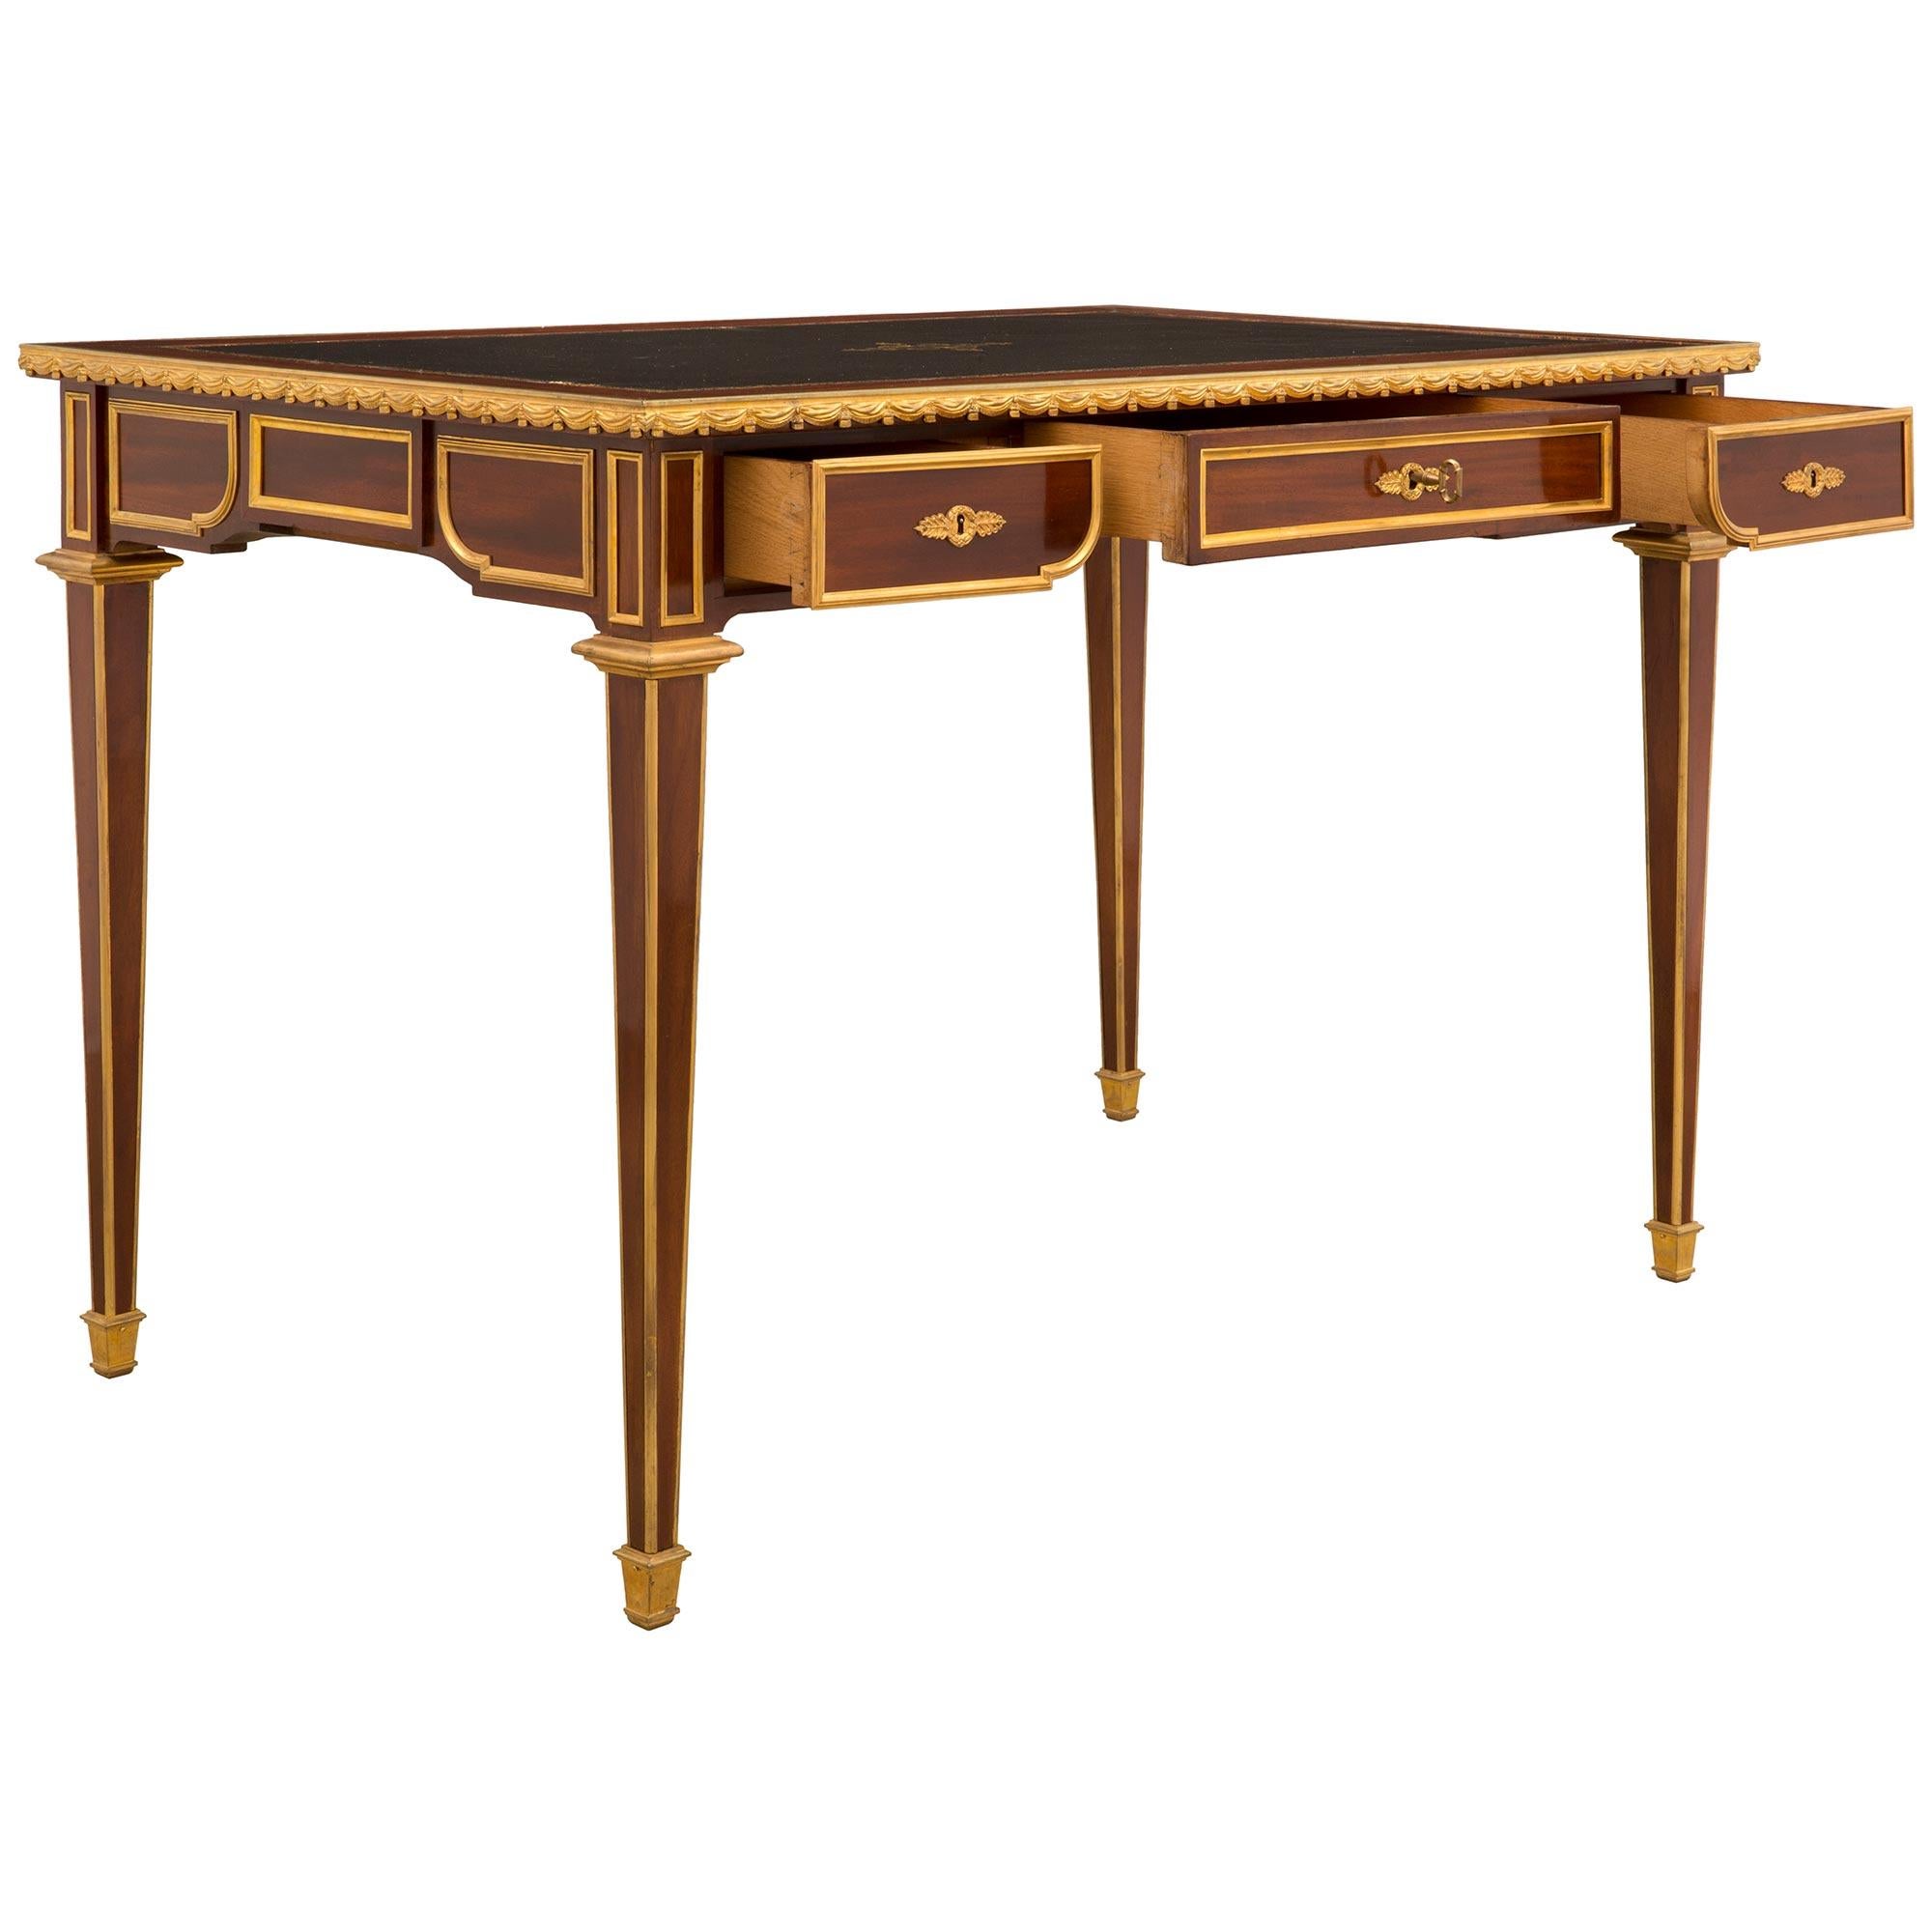 French 19th Century Louis XVI Style Mahogany and Ormolu Desk For Sale 1